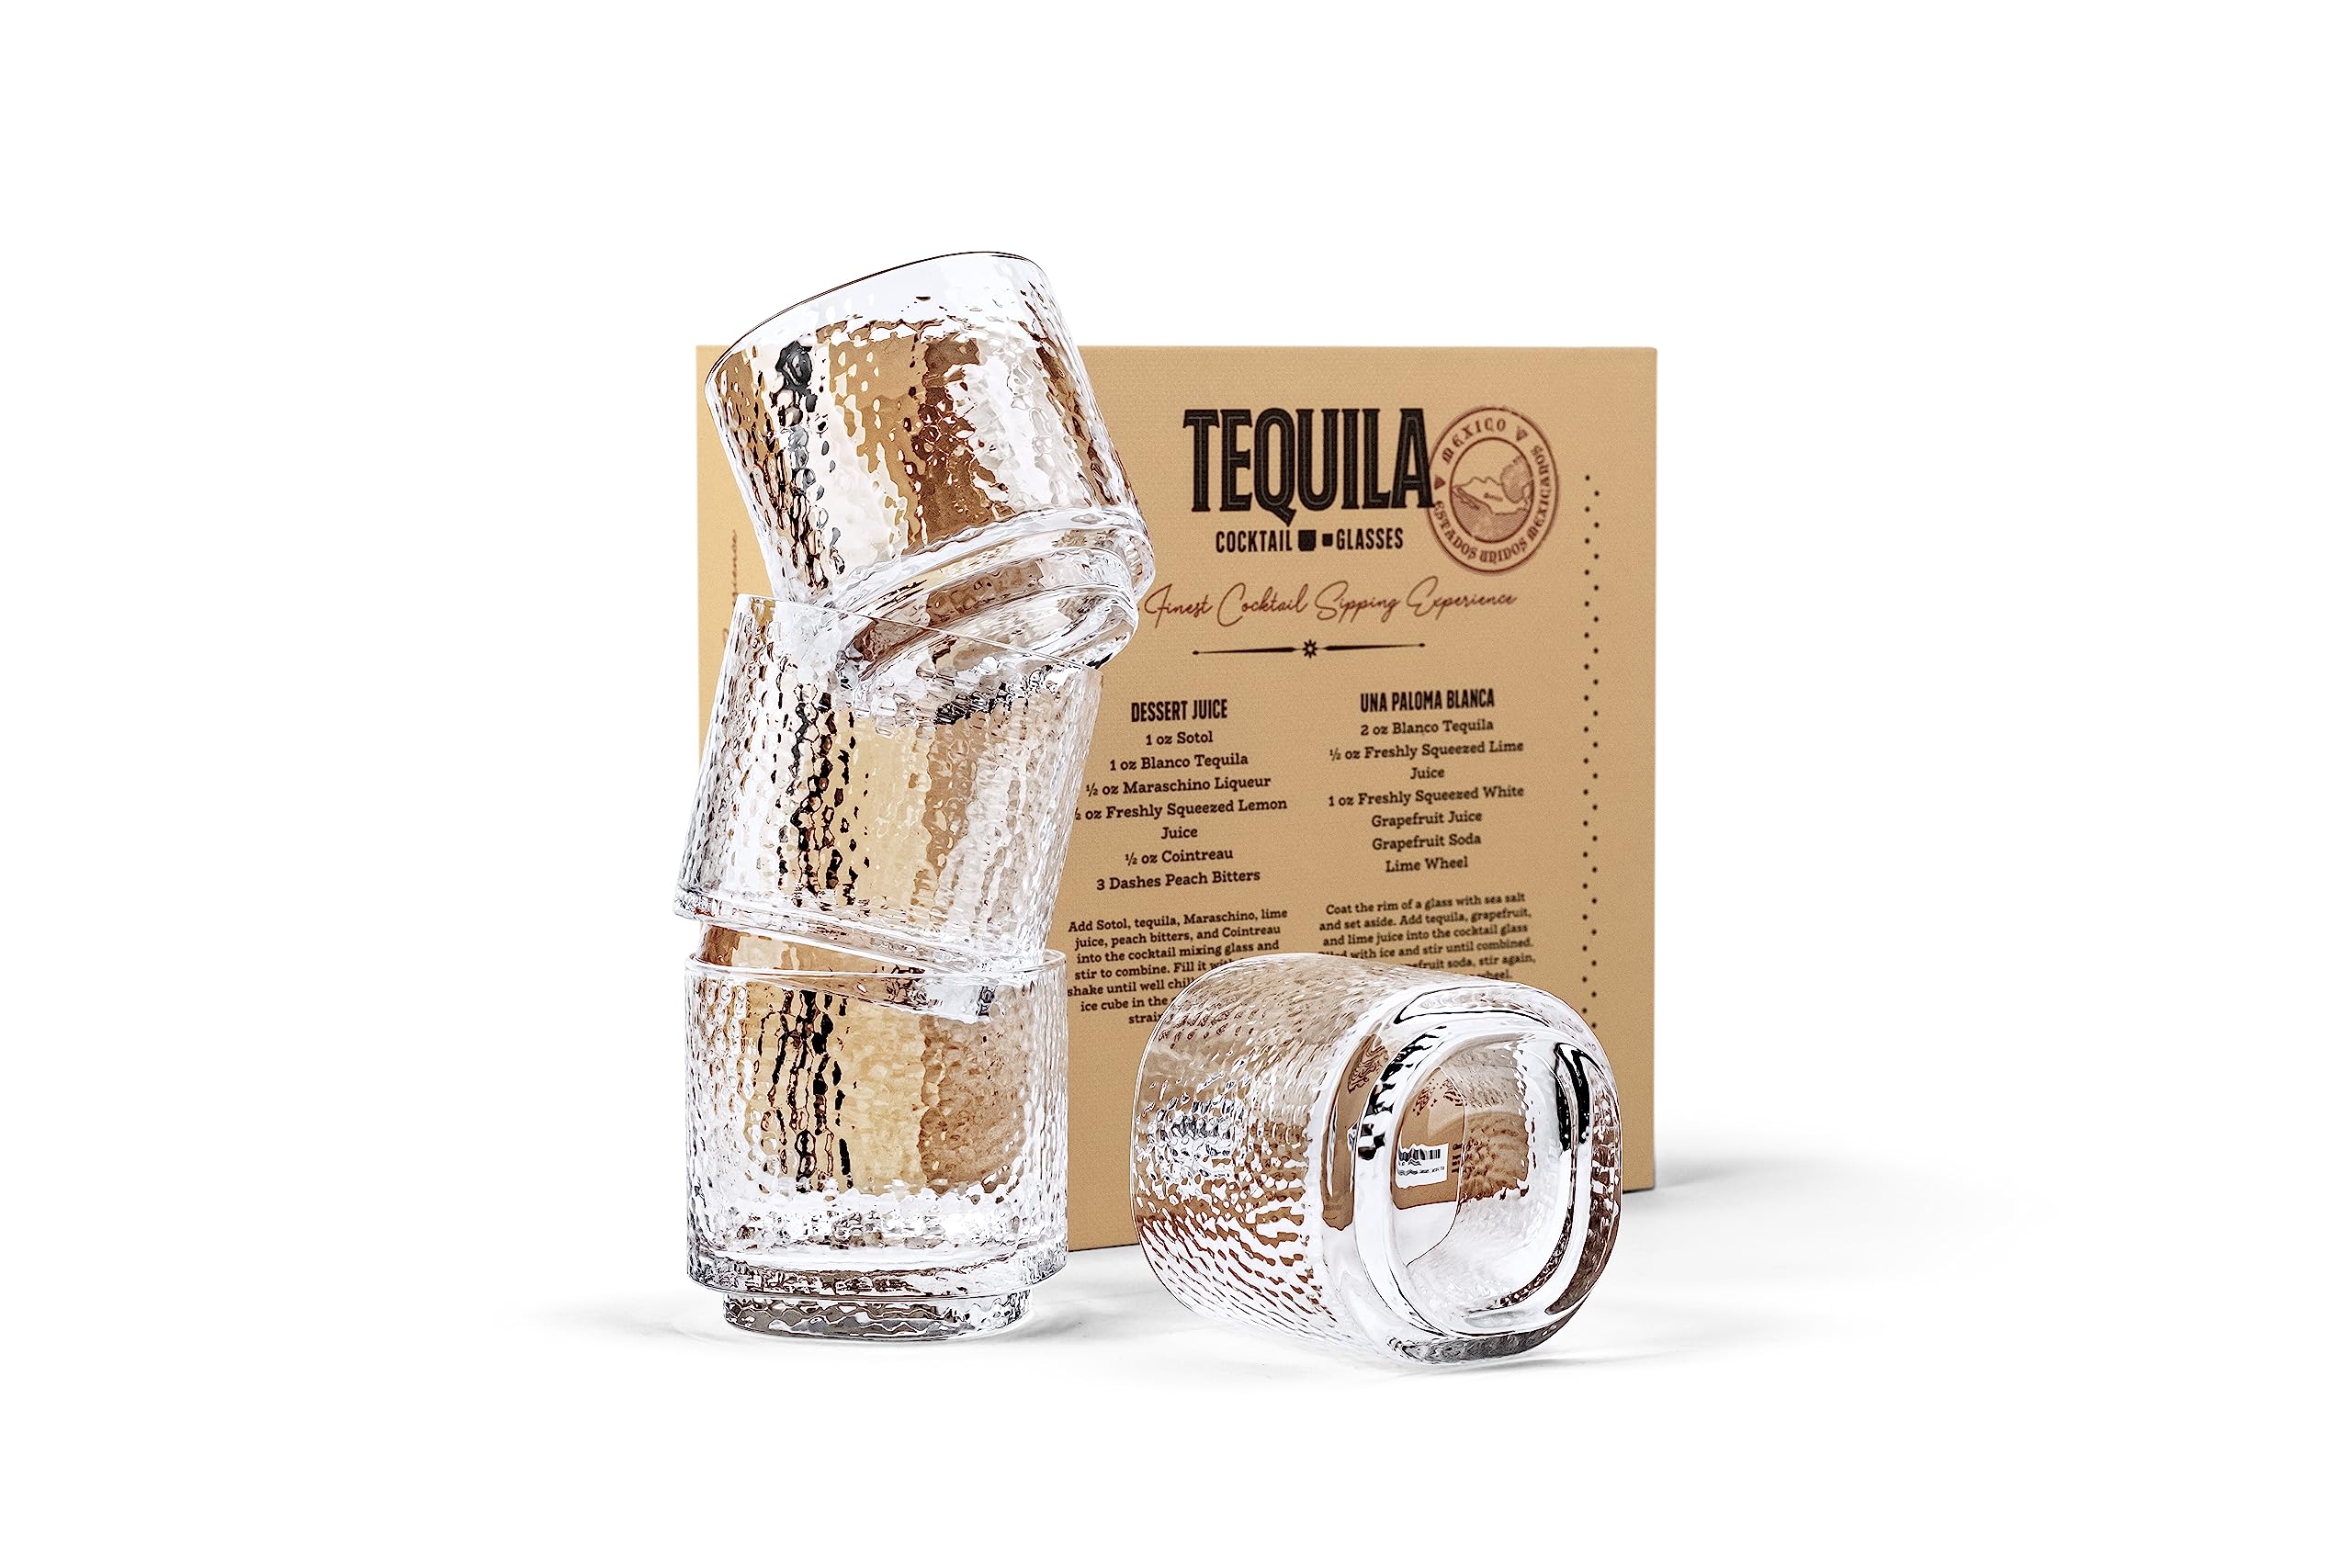 GLASSIQUE CADEAU Tequila Sipping and Cocktail Glasses | Set of 4 | 10 oz Hammered Rocks Glasses for Drinking Mezcal, Margarita, Paloma | Thick Lowball Glasses | Tequila Glassware Collection